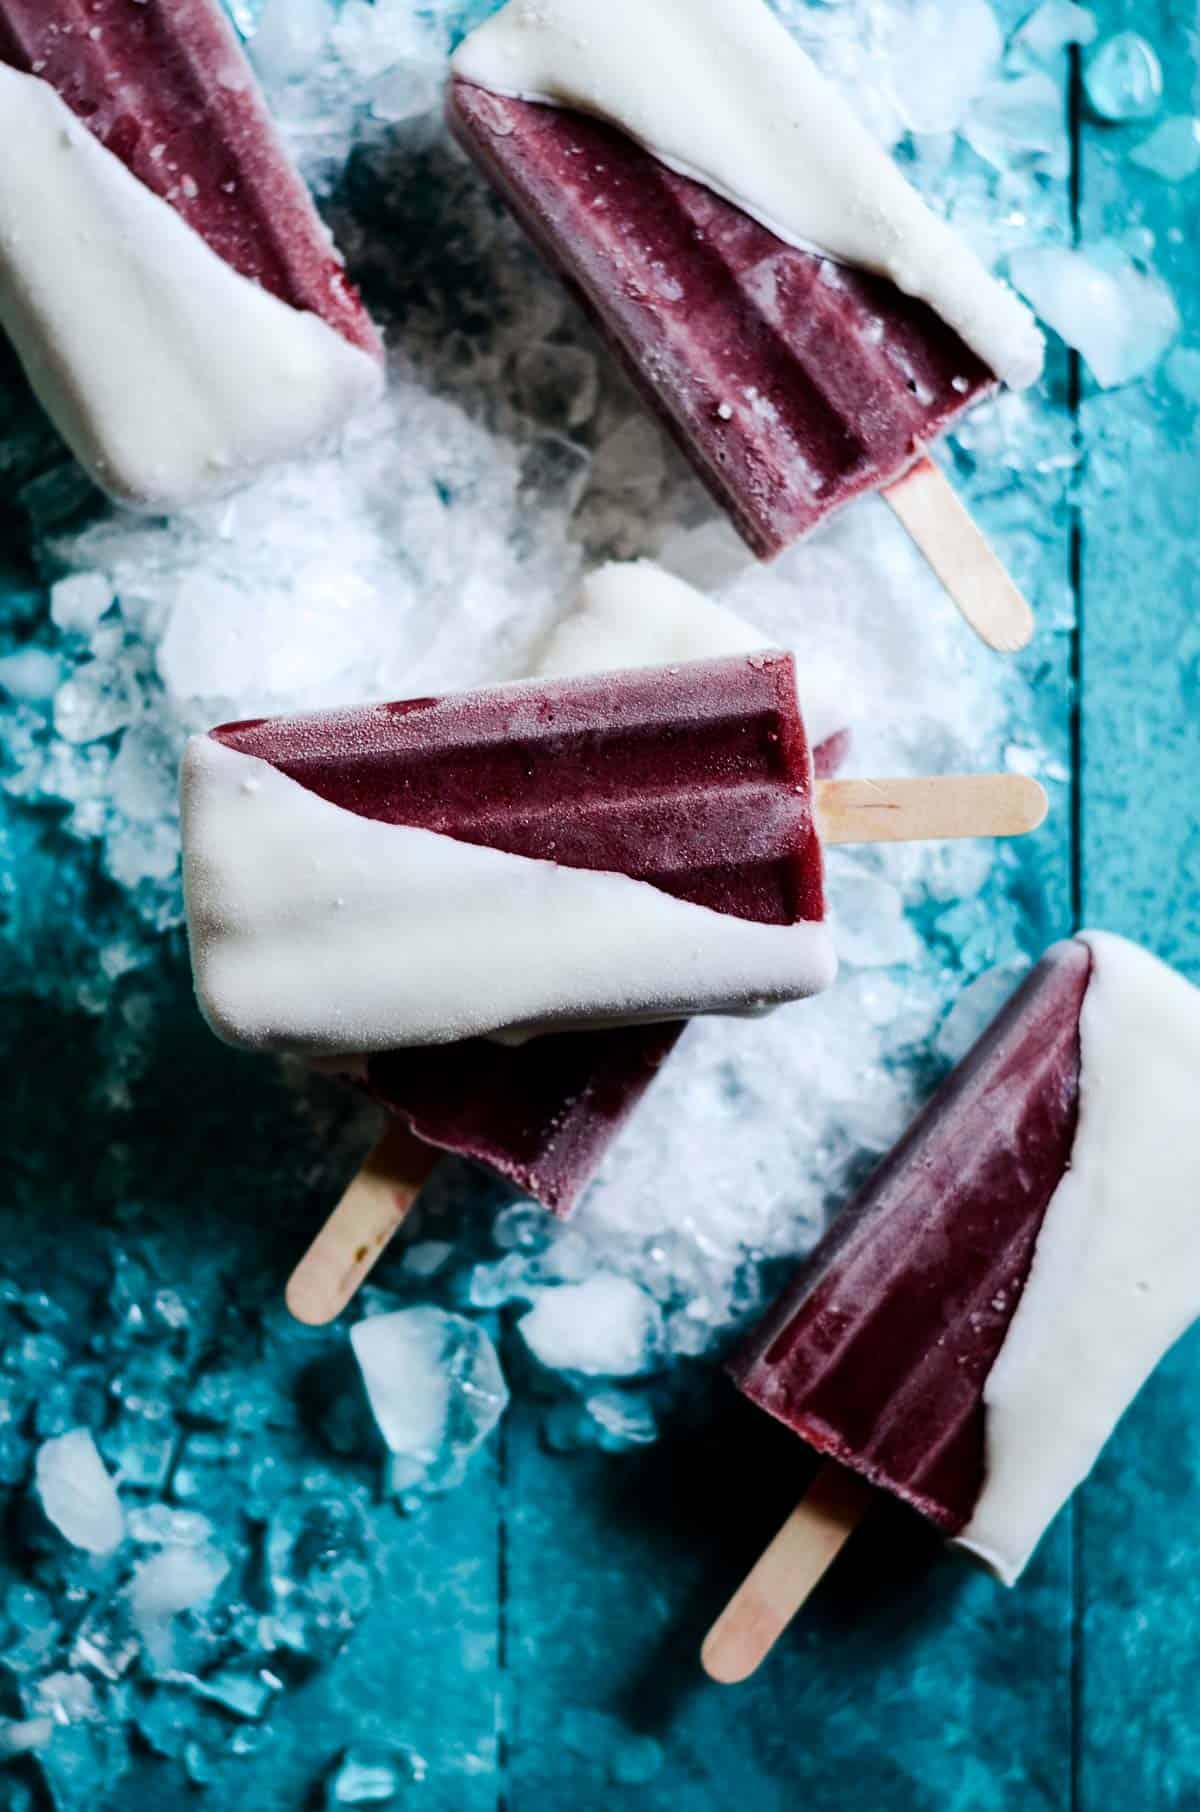 Cherry popsicles that are dark red dipped in chocolate laying on a bright blue counter with ice on it.